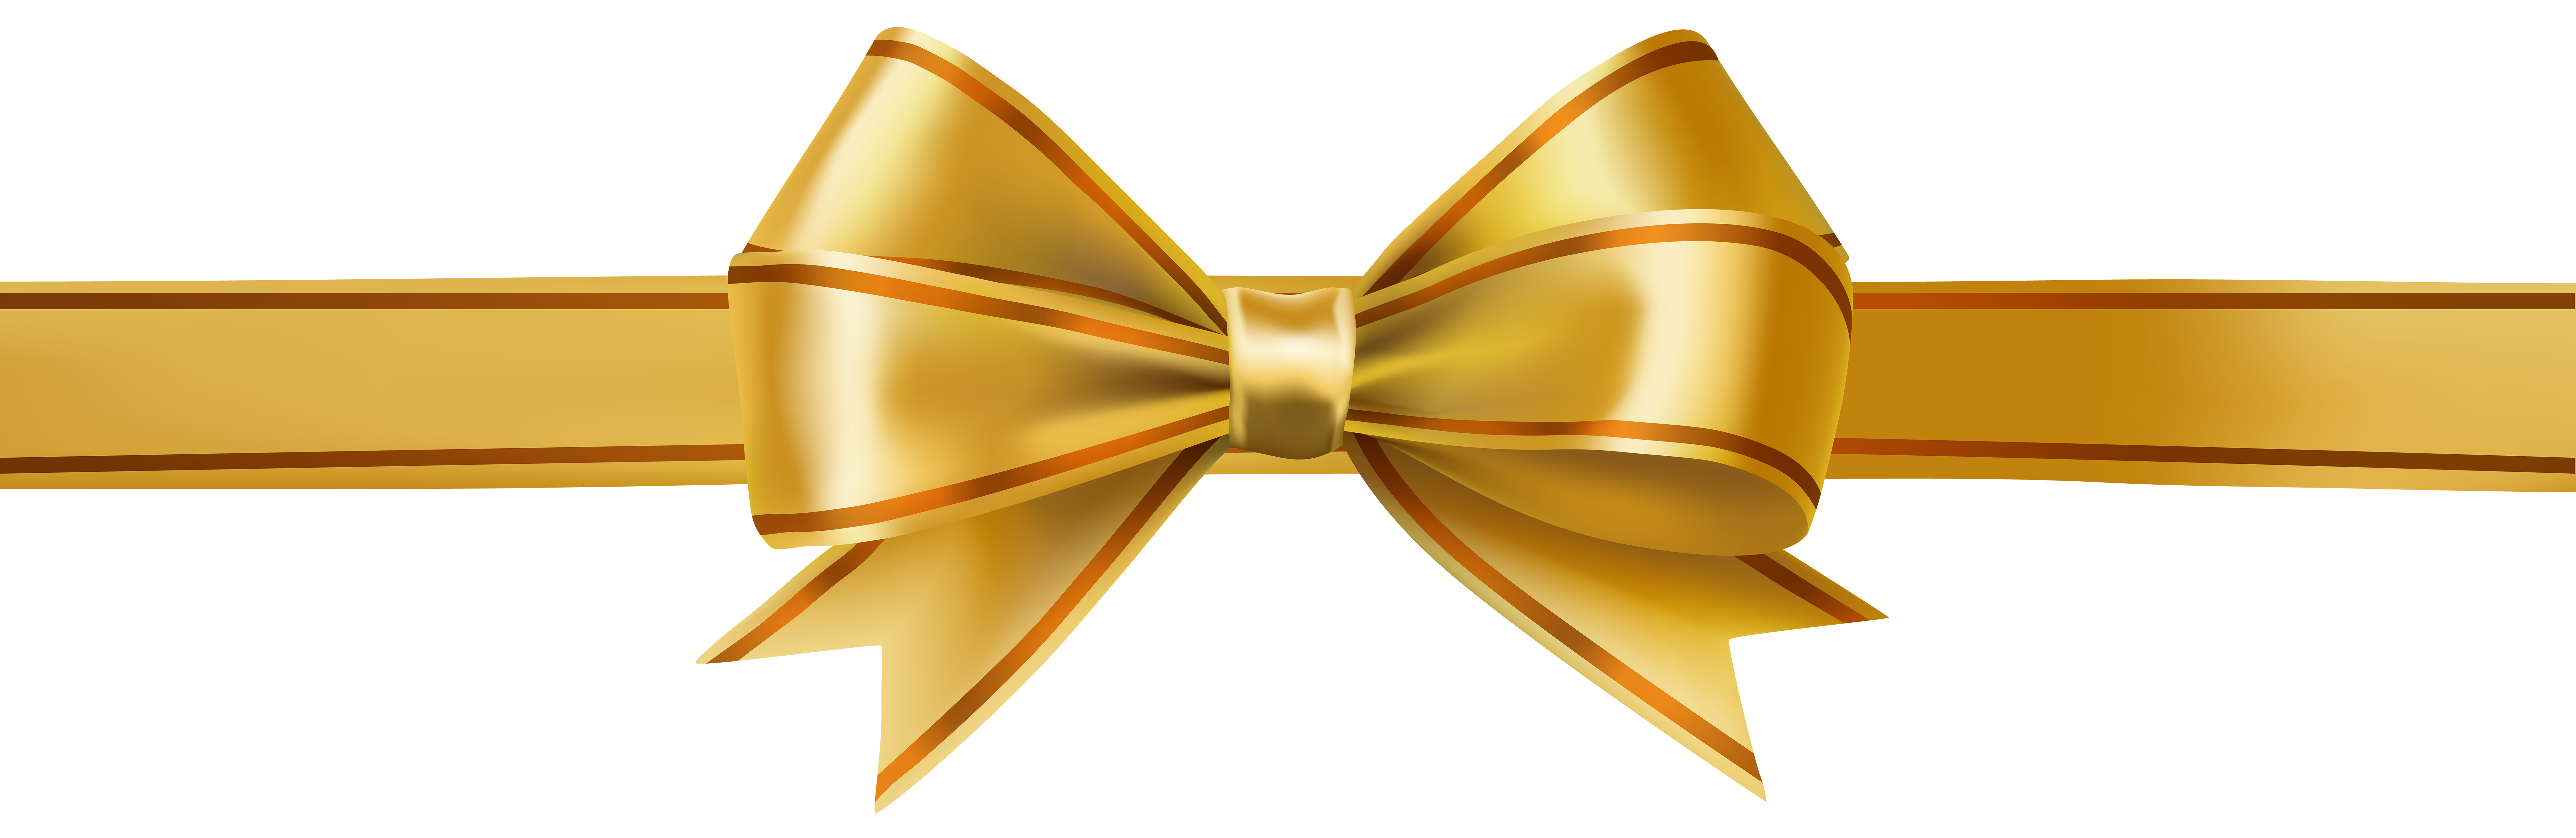 Golden Ribbon Bow Free HD Image Clipart